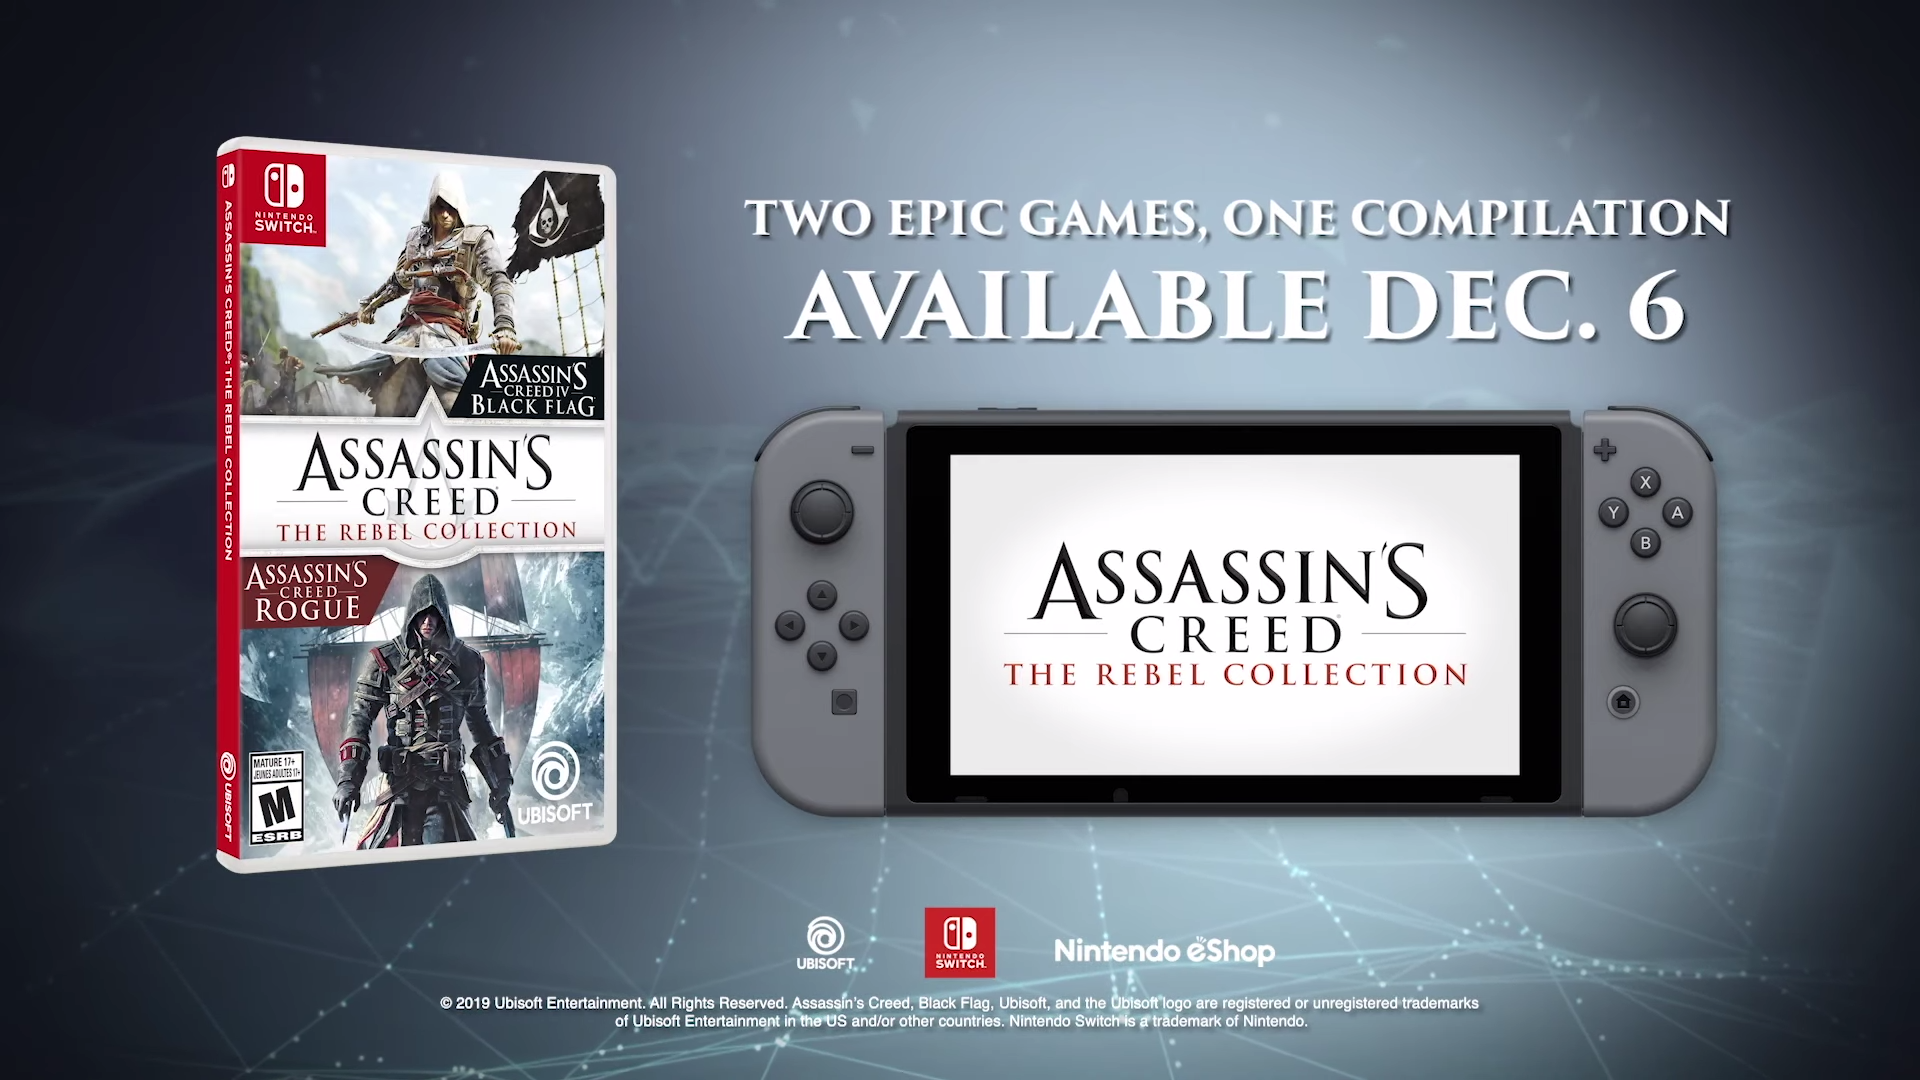 Assassin's Creed: The Rebel Collection Will Launch On December 6